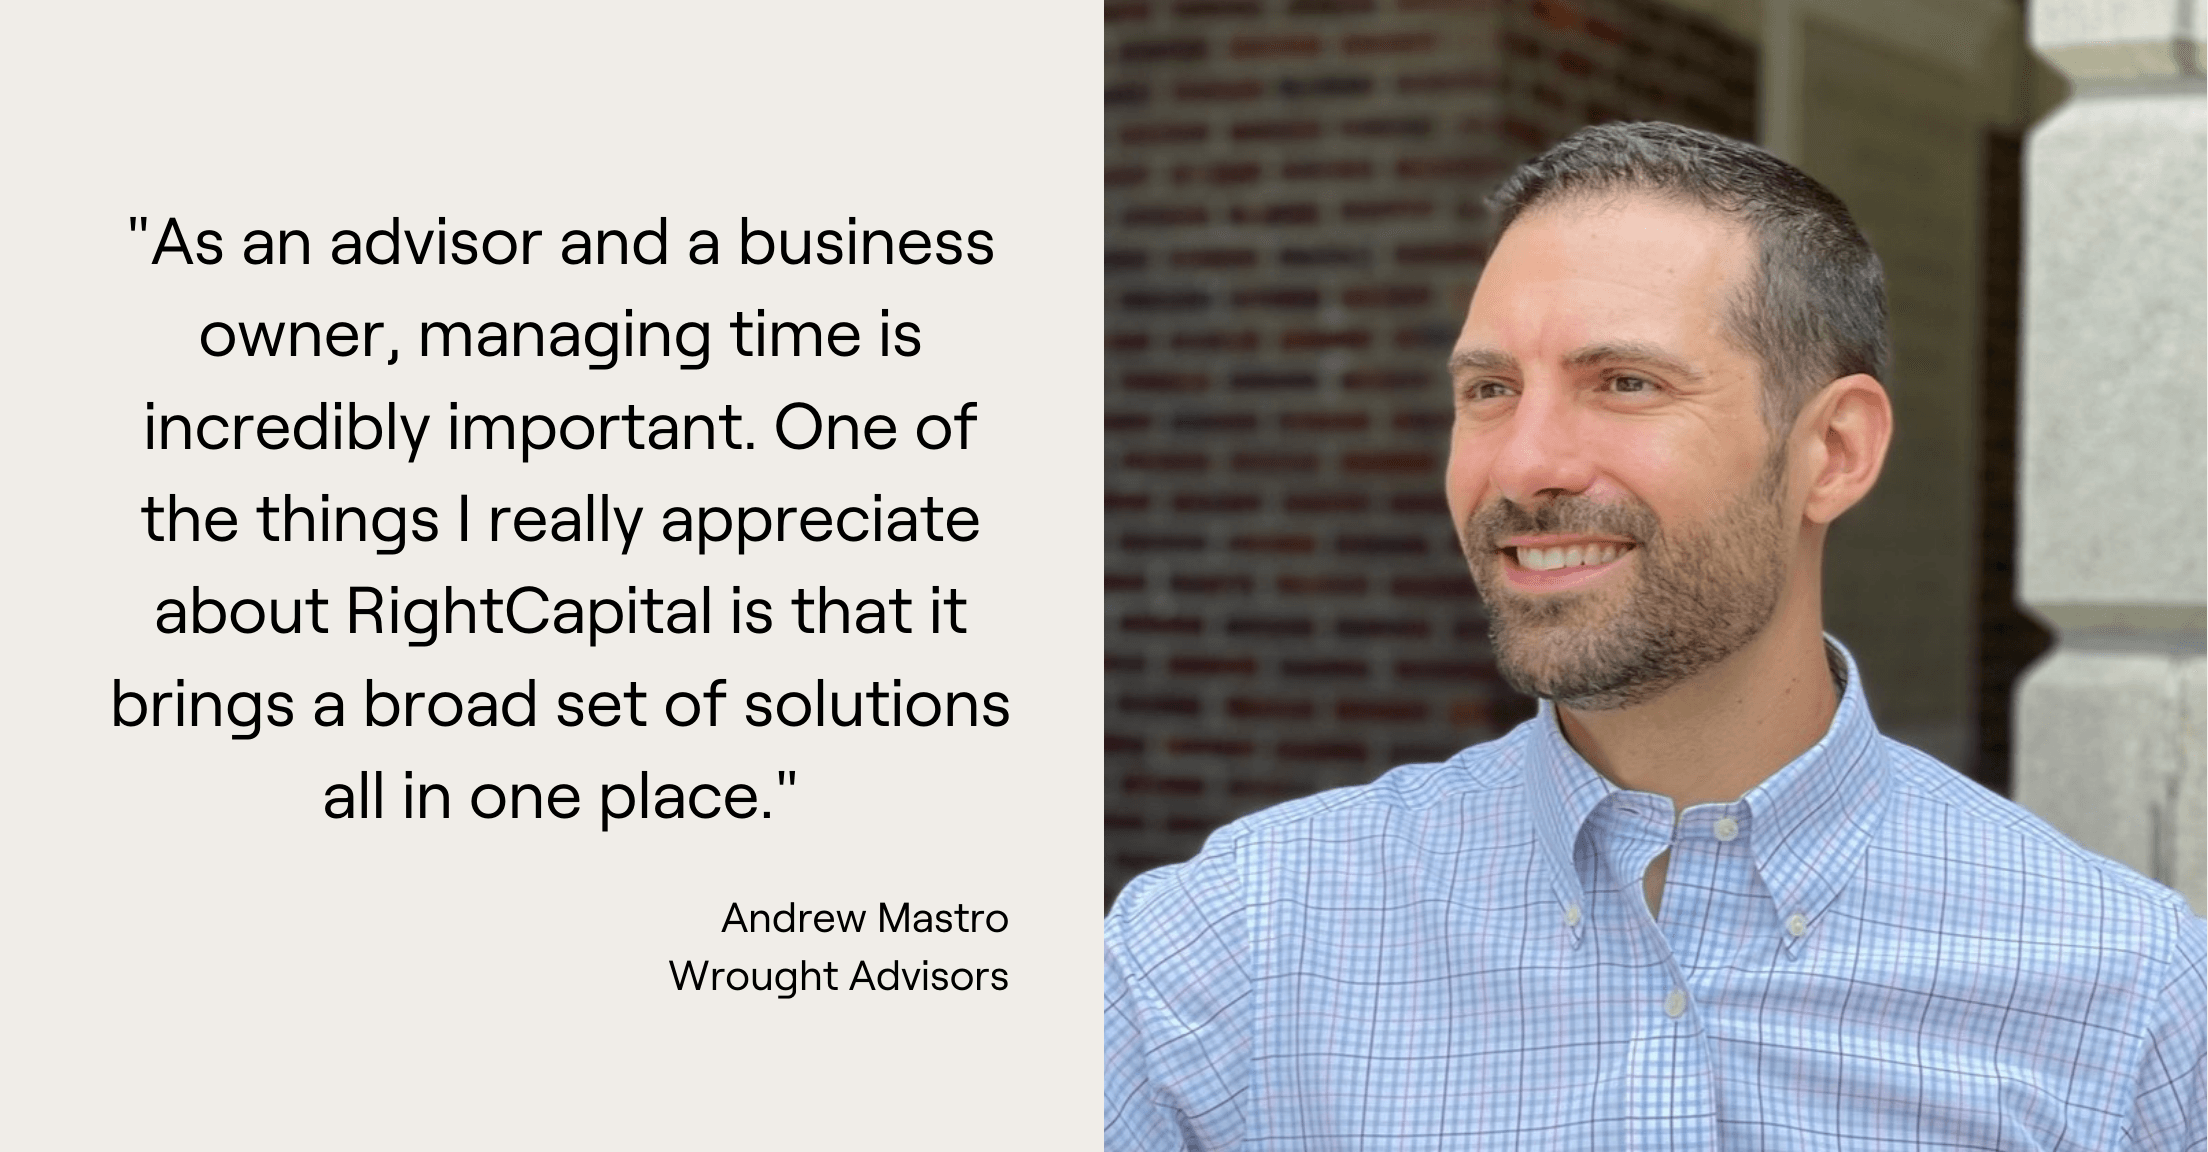 Quote from Andrew Mastro, "As an advisor and a business owner, managing time is incredibly important. One of the things I really appreciate about RightCapital is that it brings a broad set of solutions all in one place."